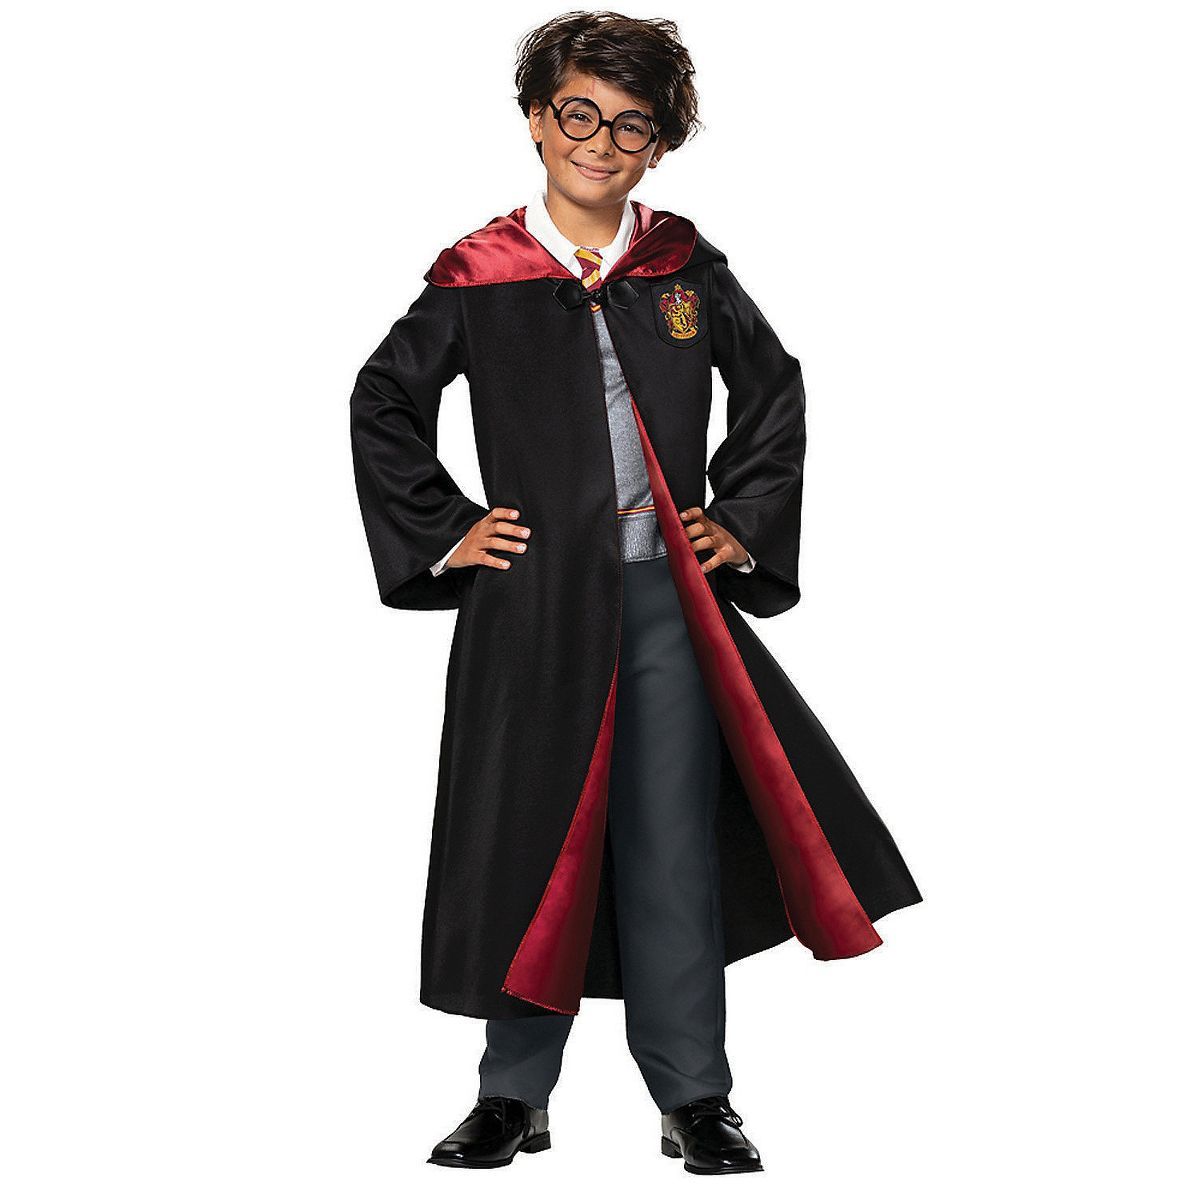 Disguise Boys' Deluxe Harry Potter Costume | Target